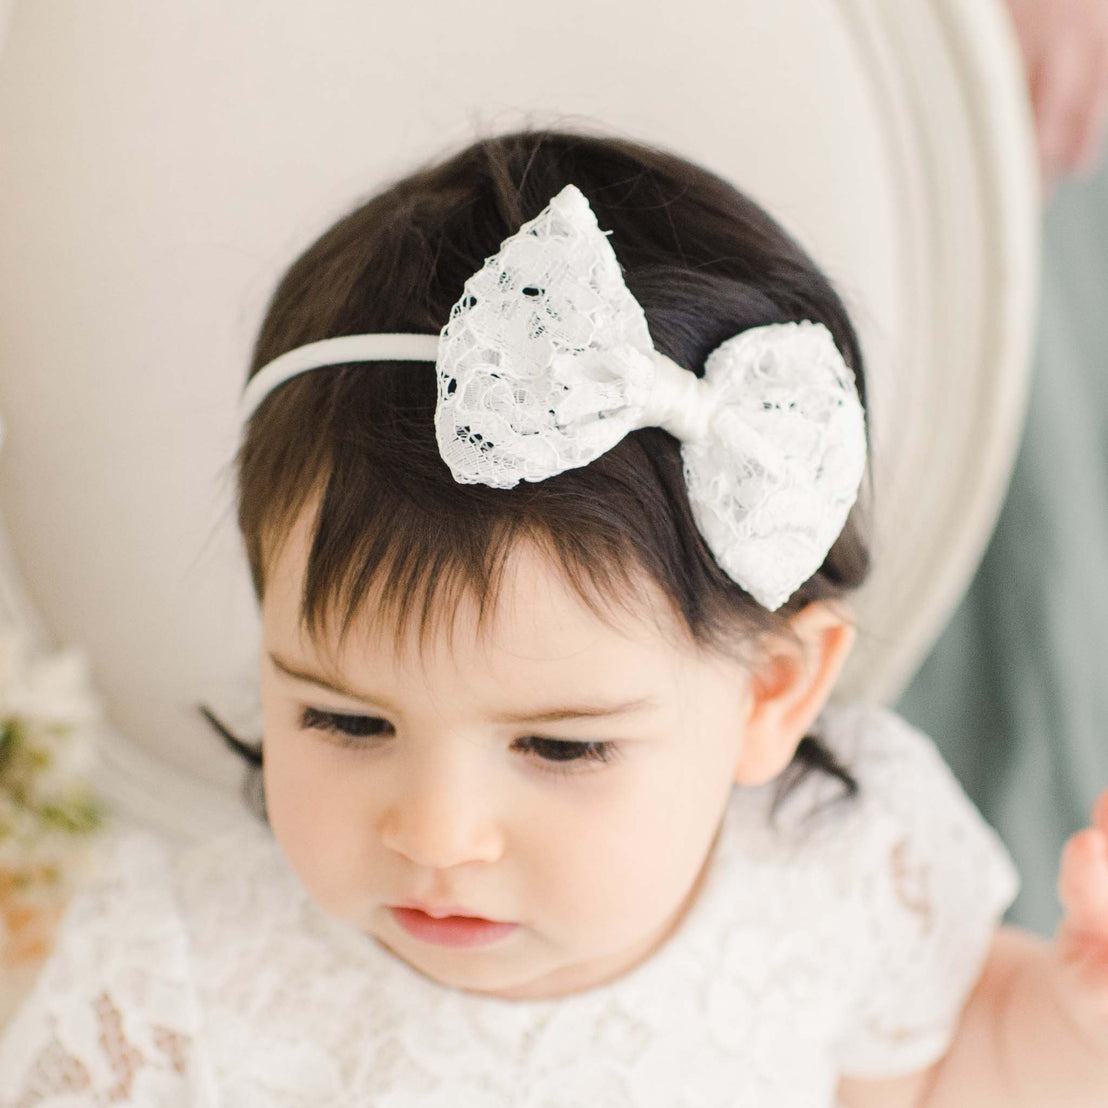 A toddler with dark hair wearing a white lace dress and a Rose Bow Headband made of 100% cotton, looking down thoughtfully. The background is soft and neutral.